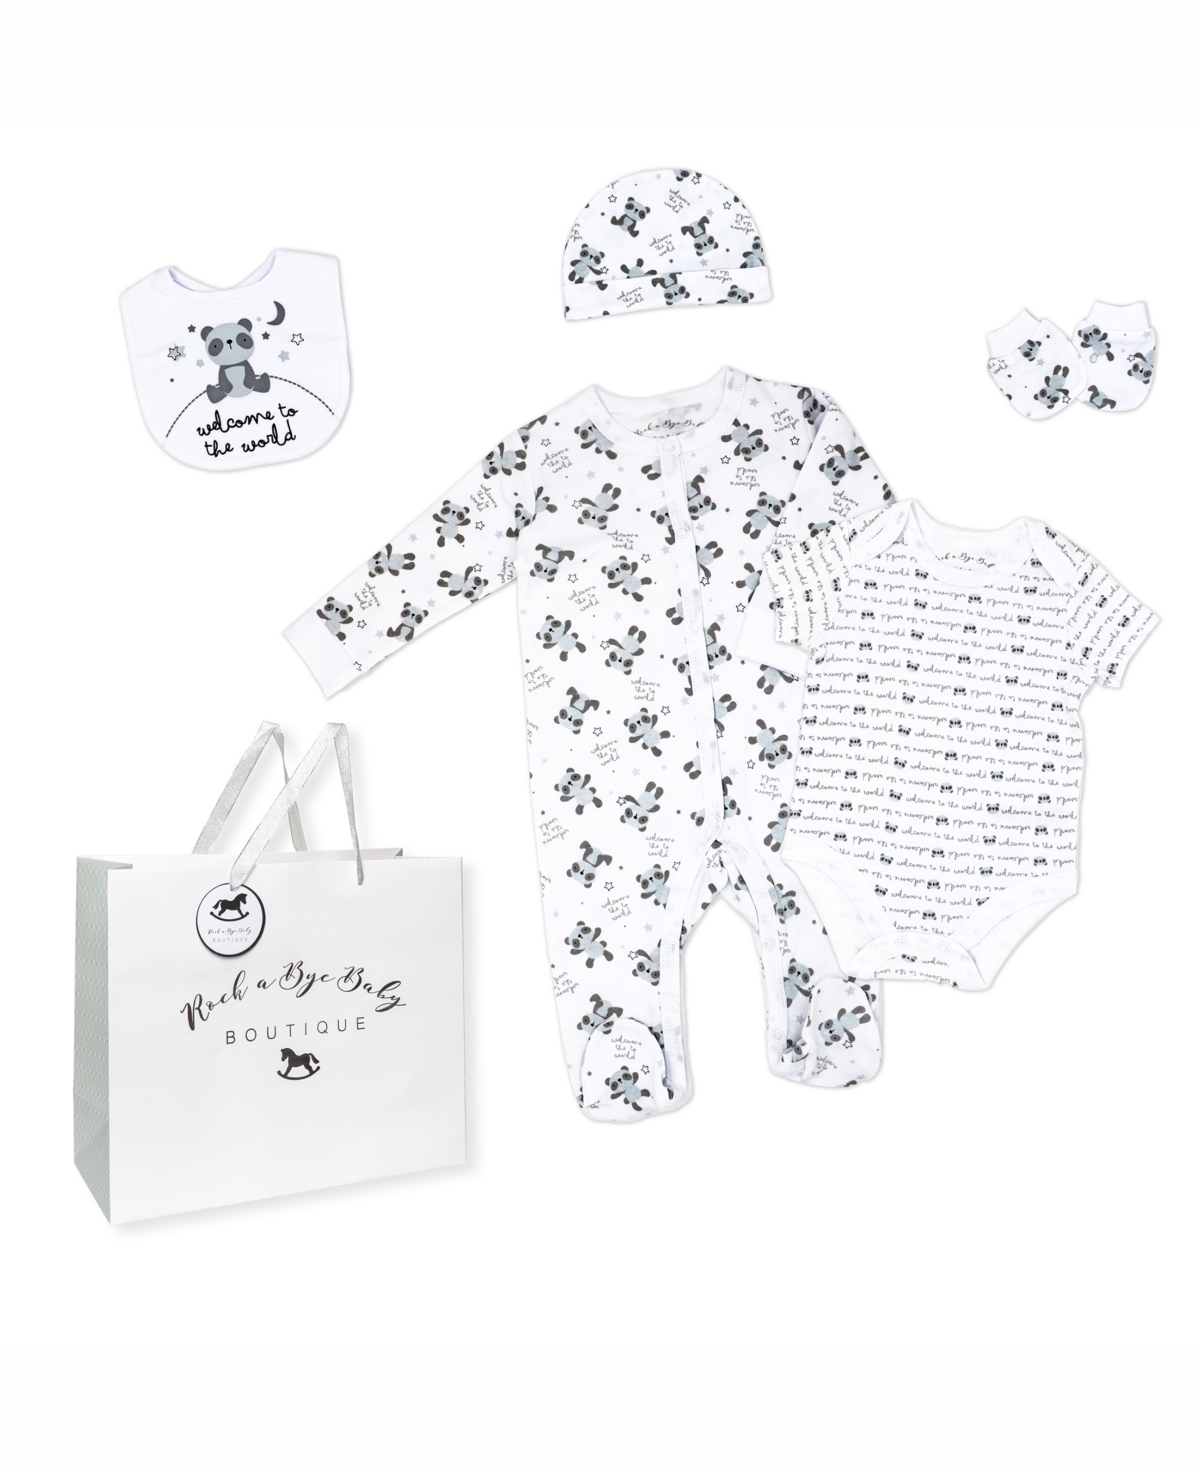 Rock-a-bye Baby Boutique Baby Boys Or Baby Girls Layette Gift Bag Set In Panda